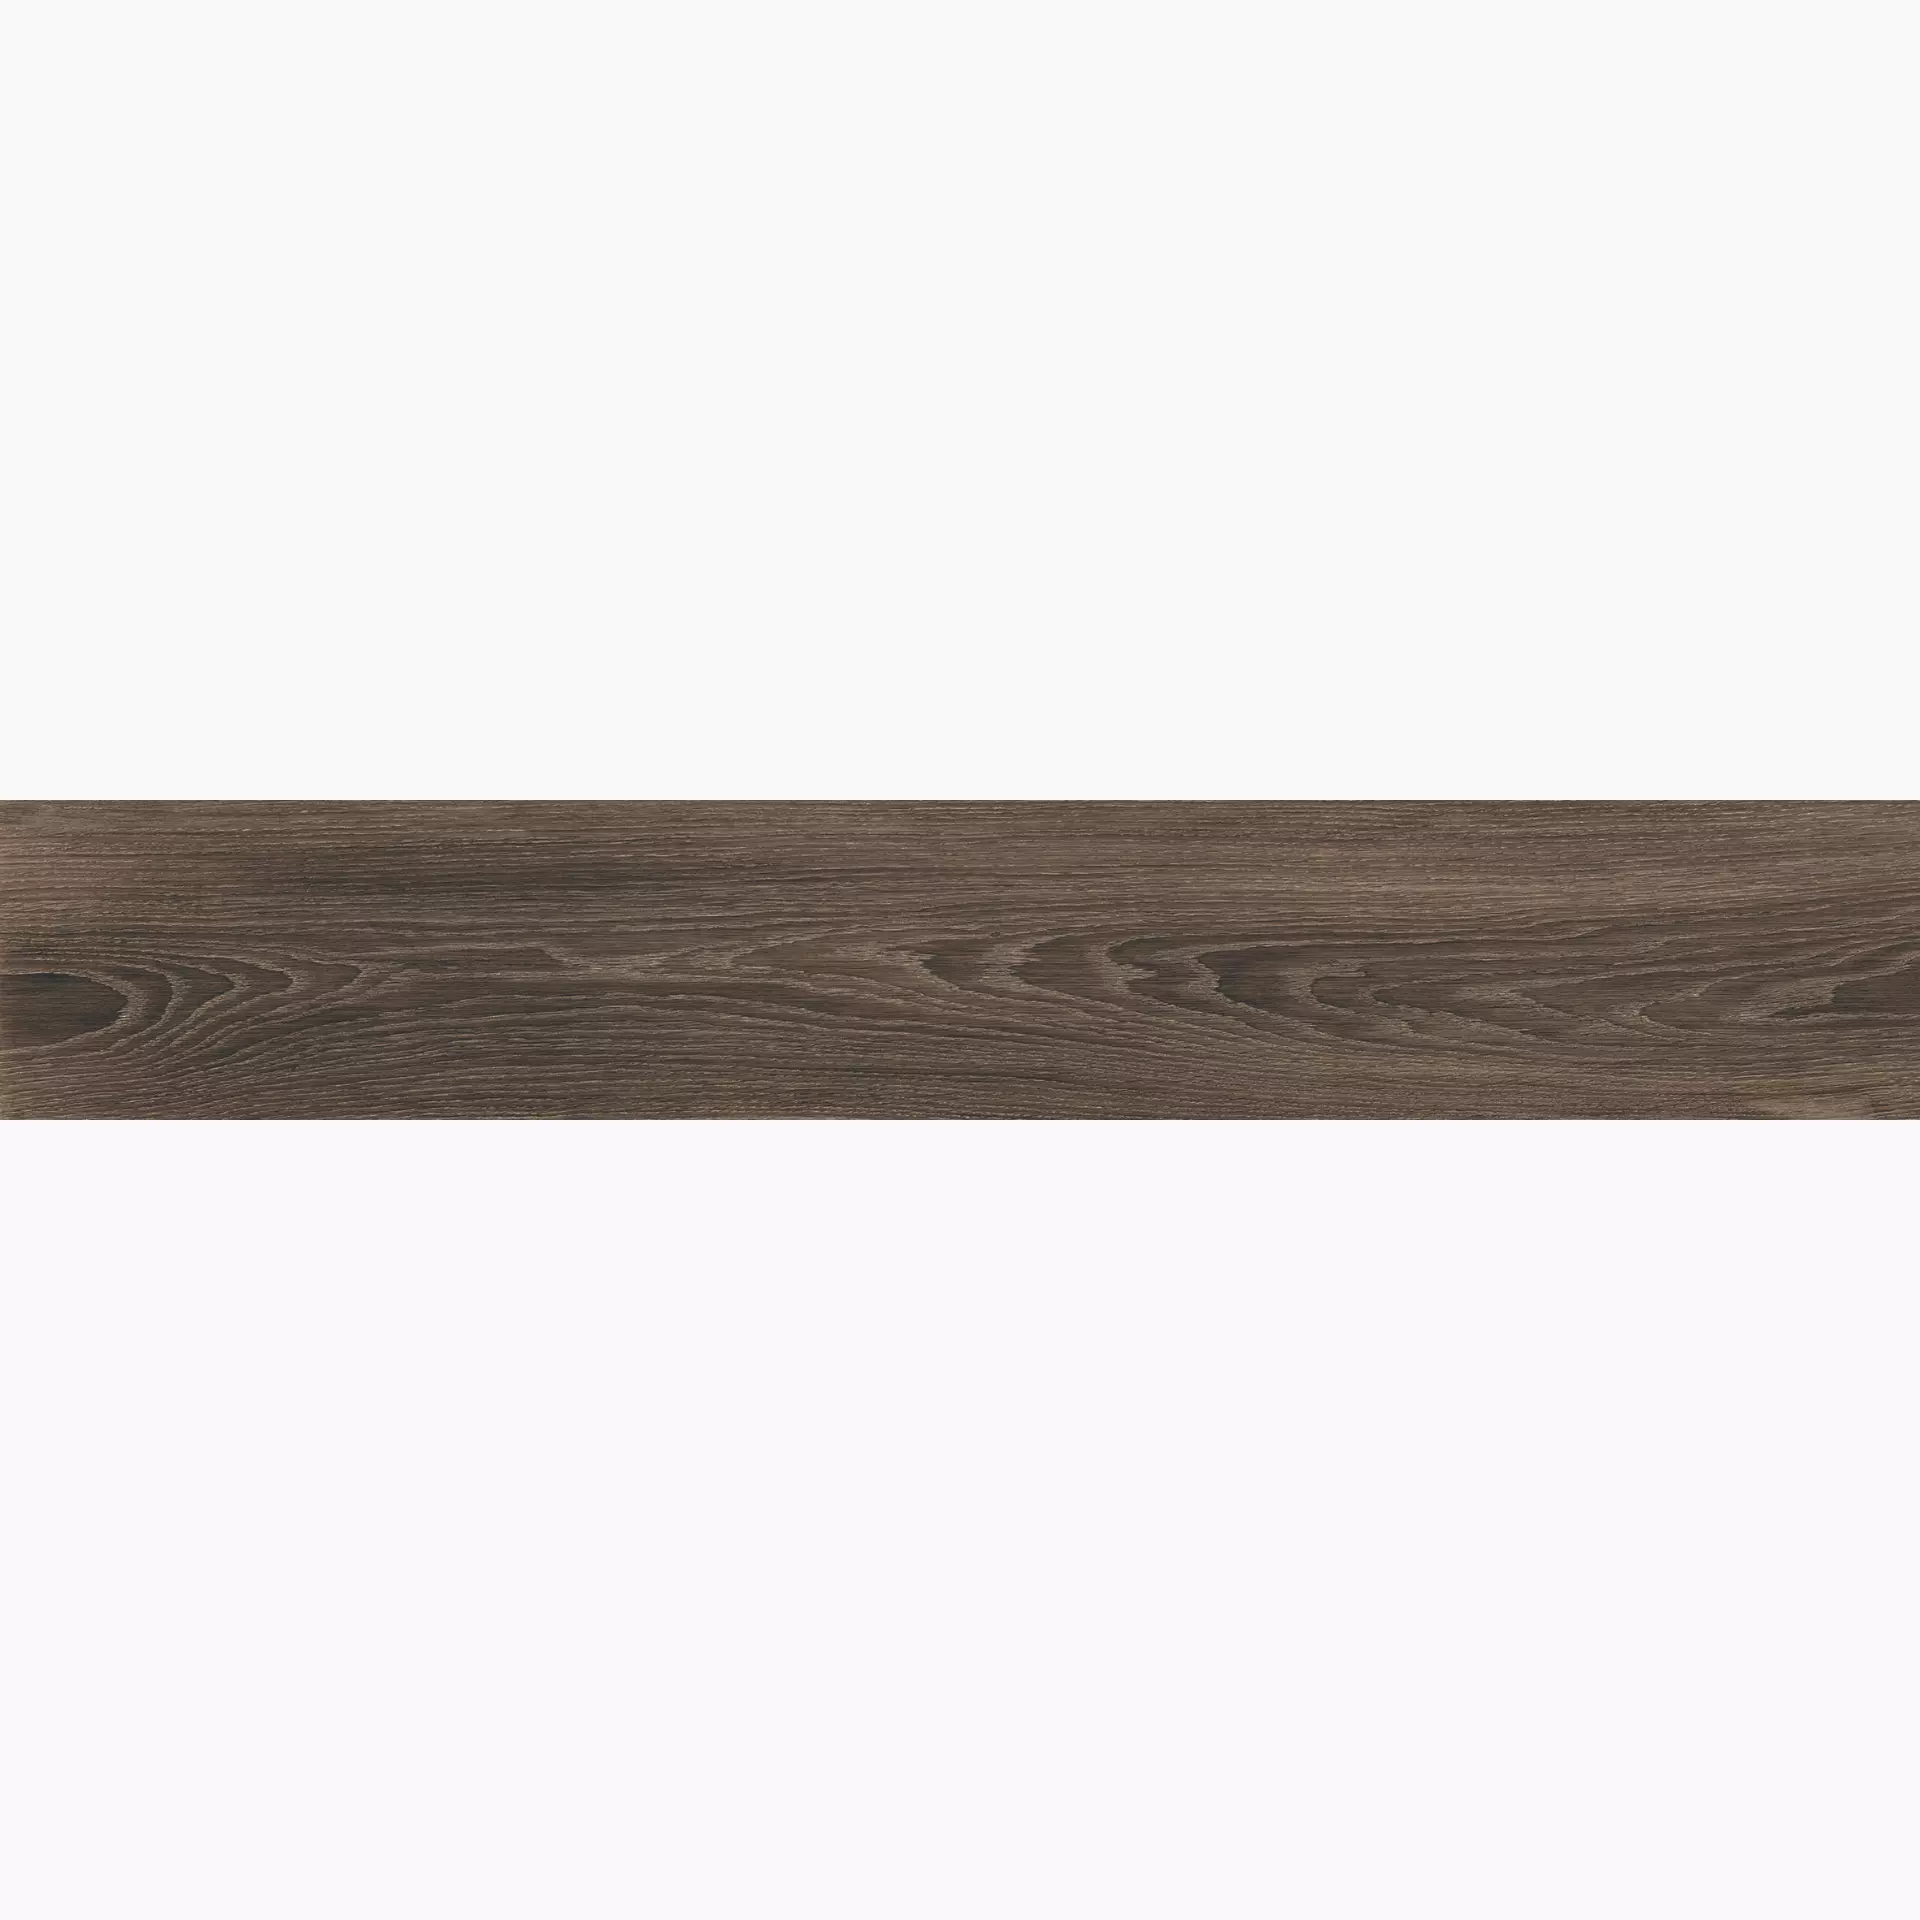 ABK Eco-Chic Brown Naturale PF60004941 20x120cm rectified 8,5mm